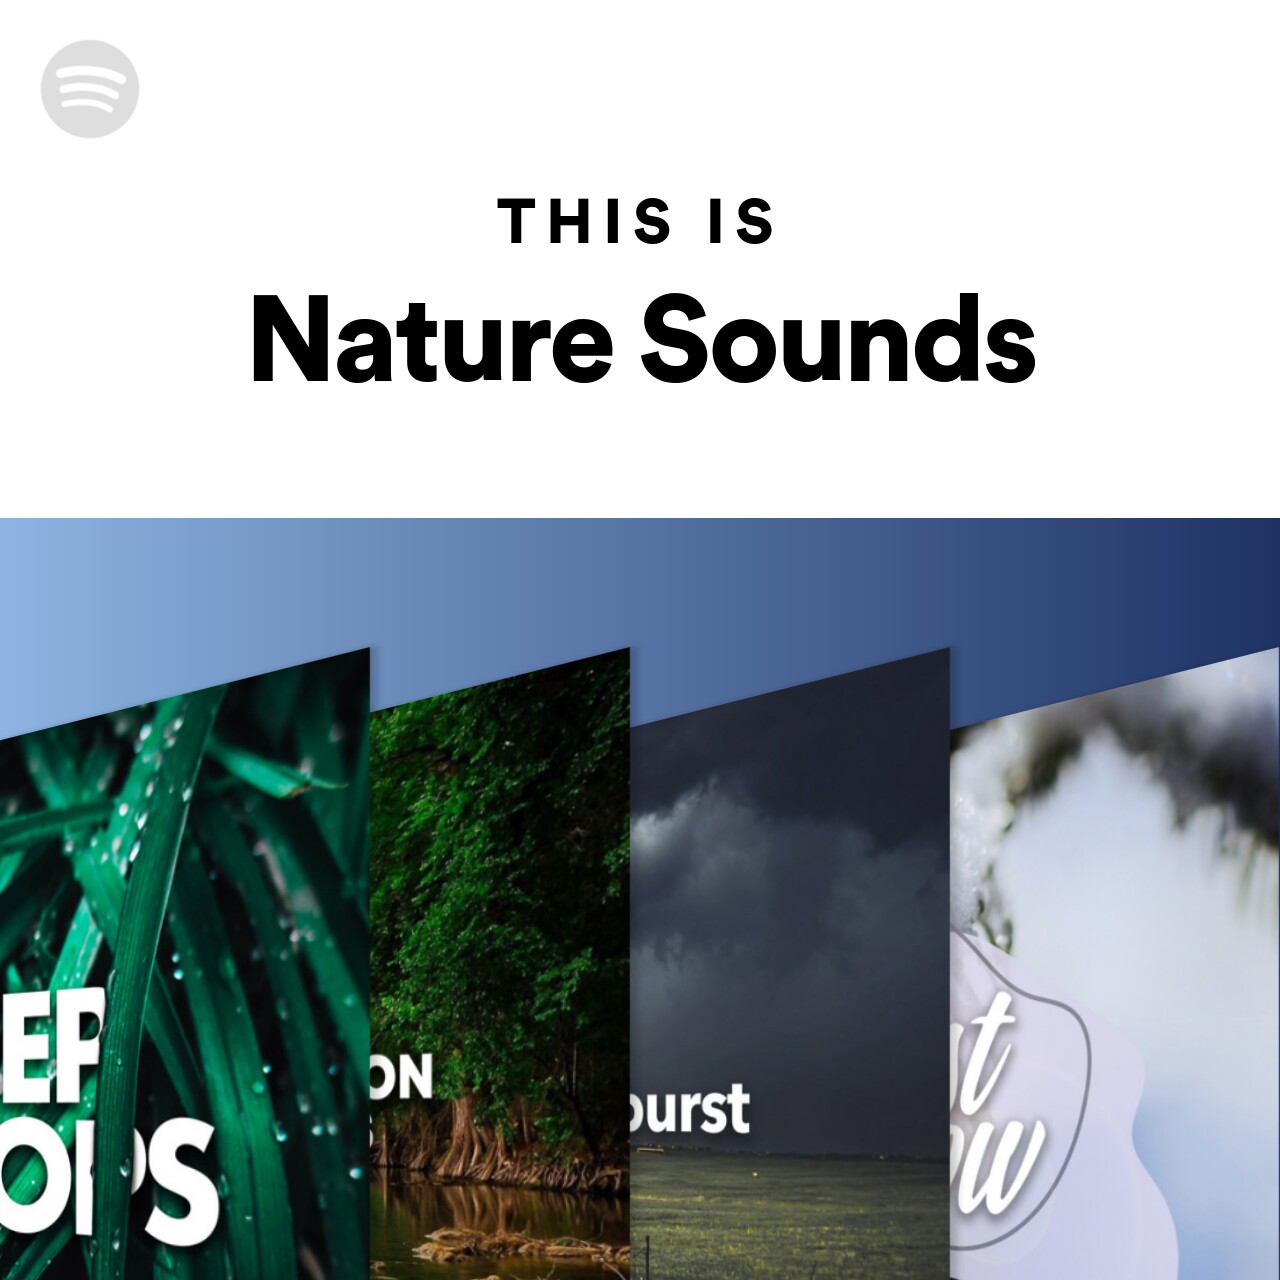 This Is Nature Sounds